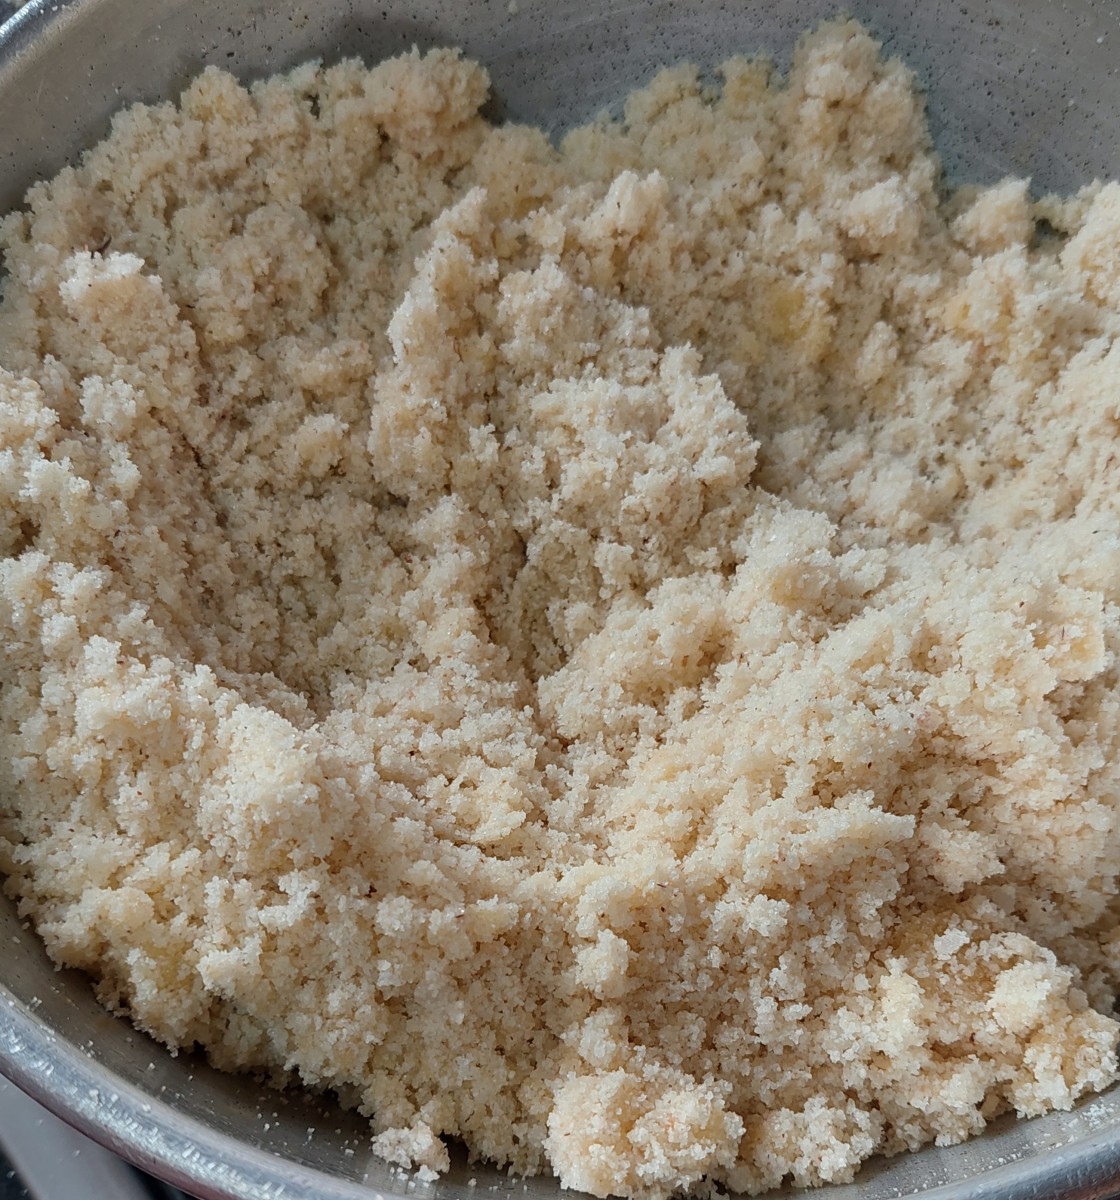 Add 2 tablespoons of ghee. Continue to fry mixture for 5 more minutes or until the rava starts to combine (add more ghee in between if the mixture becomes dry).